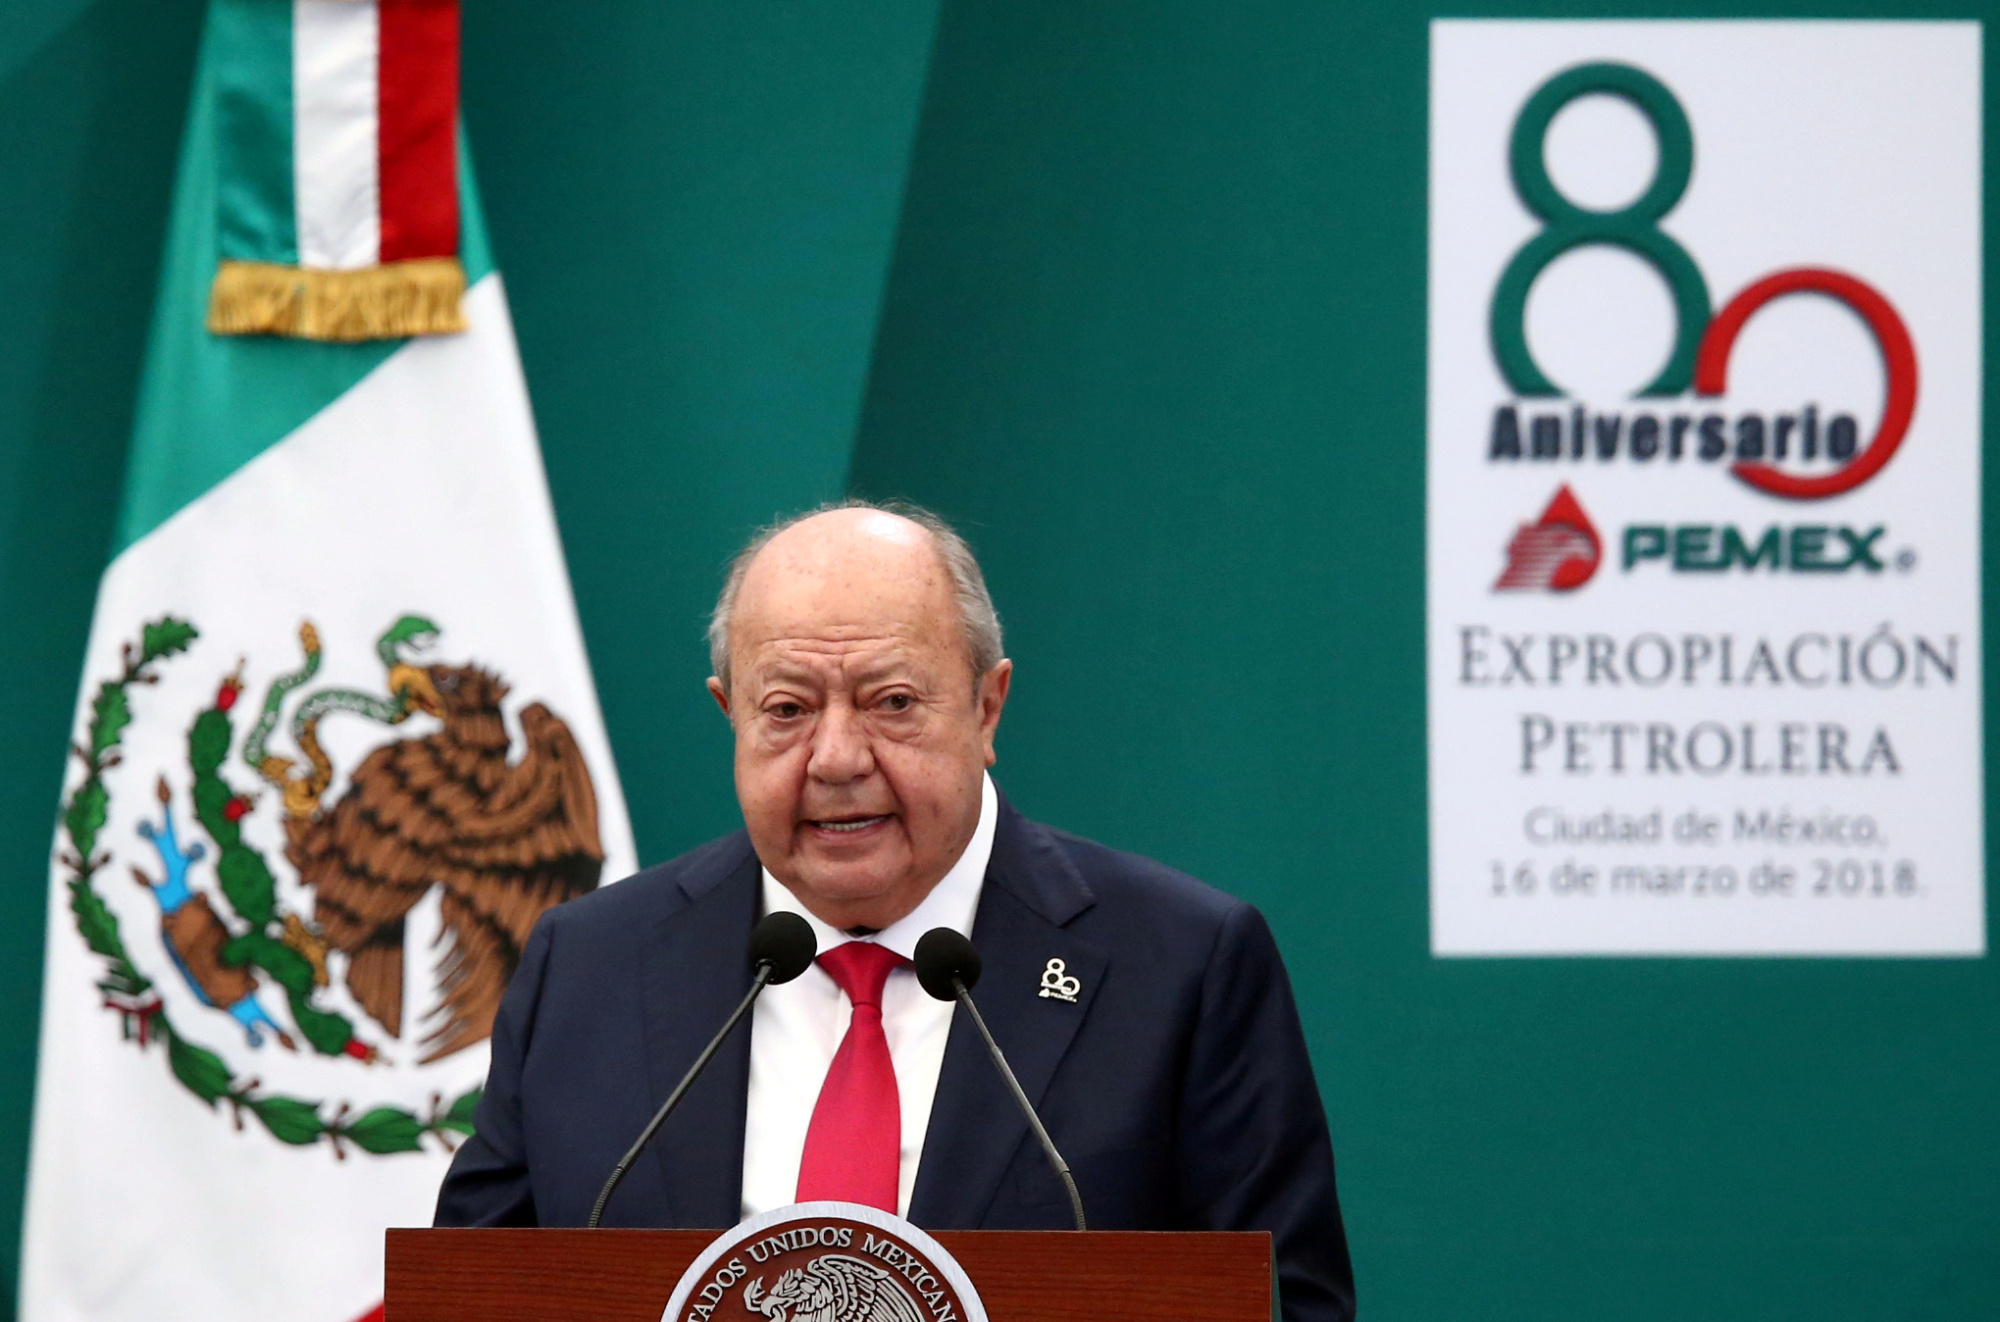 Carlos Romero Deschamps, leader of the oil workers union of Petroleos Mexicanos (Pemex), delivers a speech during the 80th anniversary of the expropriation of Mexico's oil industry in Mexico City last year. | REUTERS